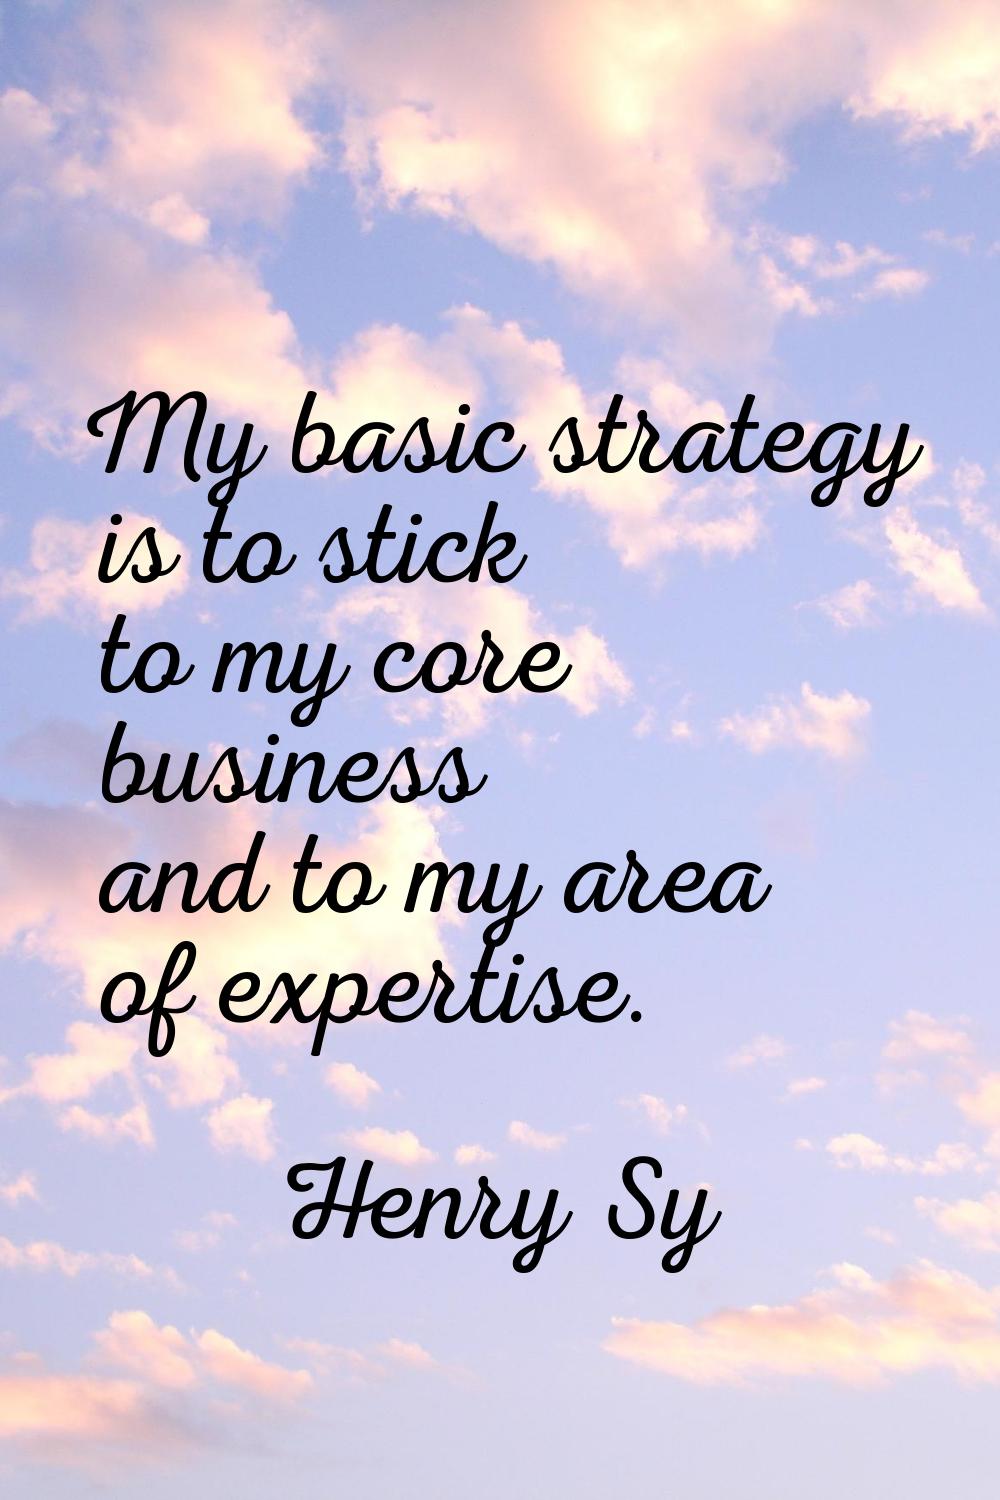 My basic strategy is to stick to my core business and to my area of expertise.